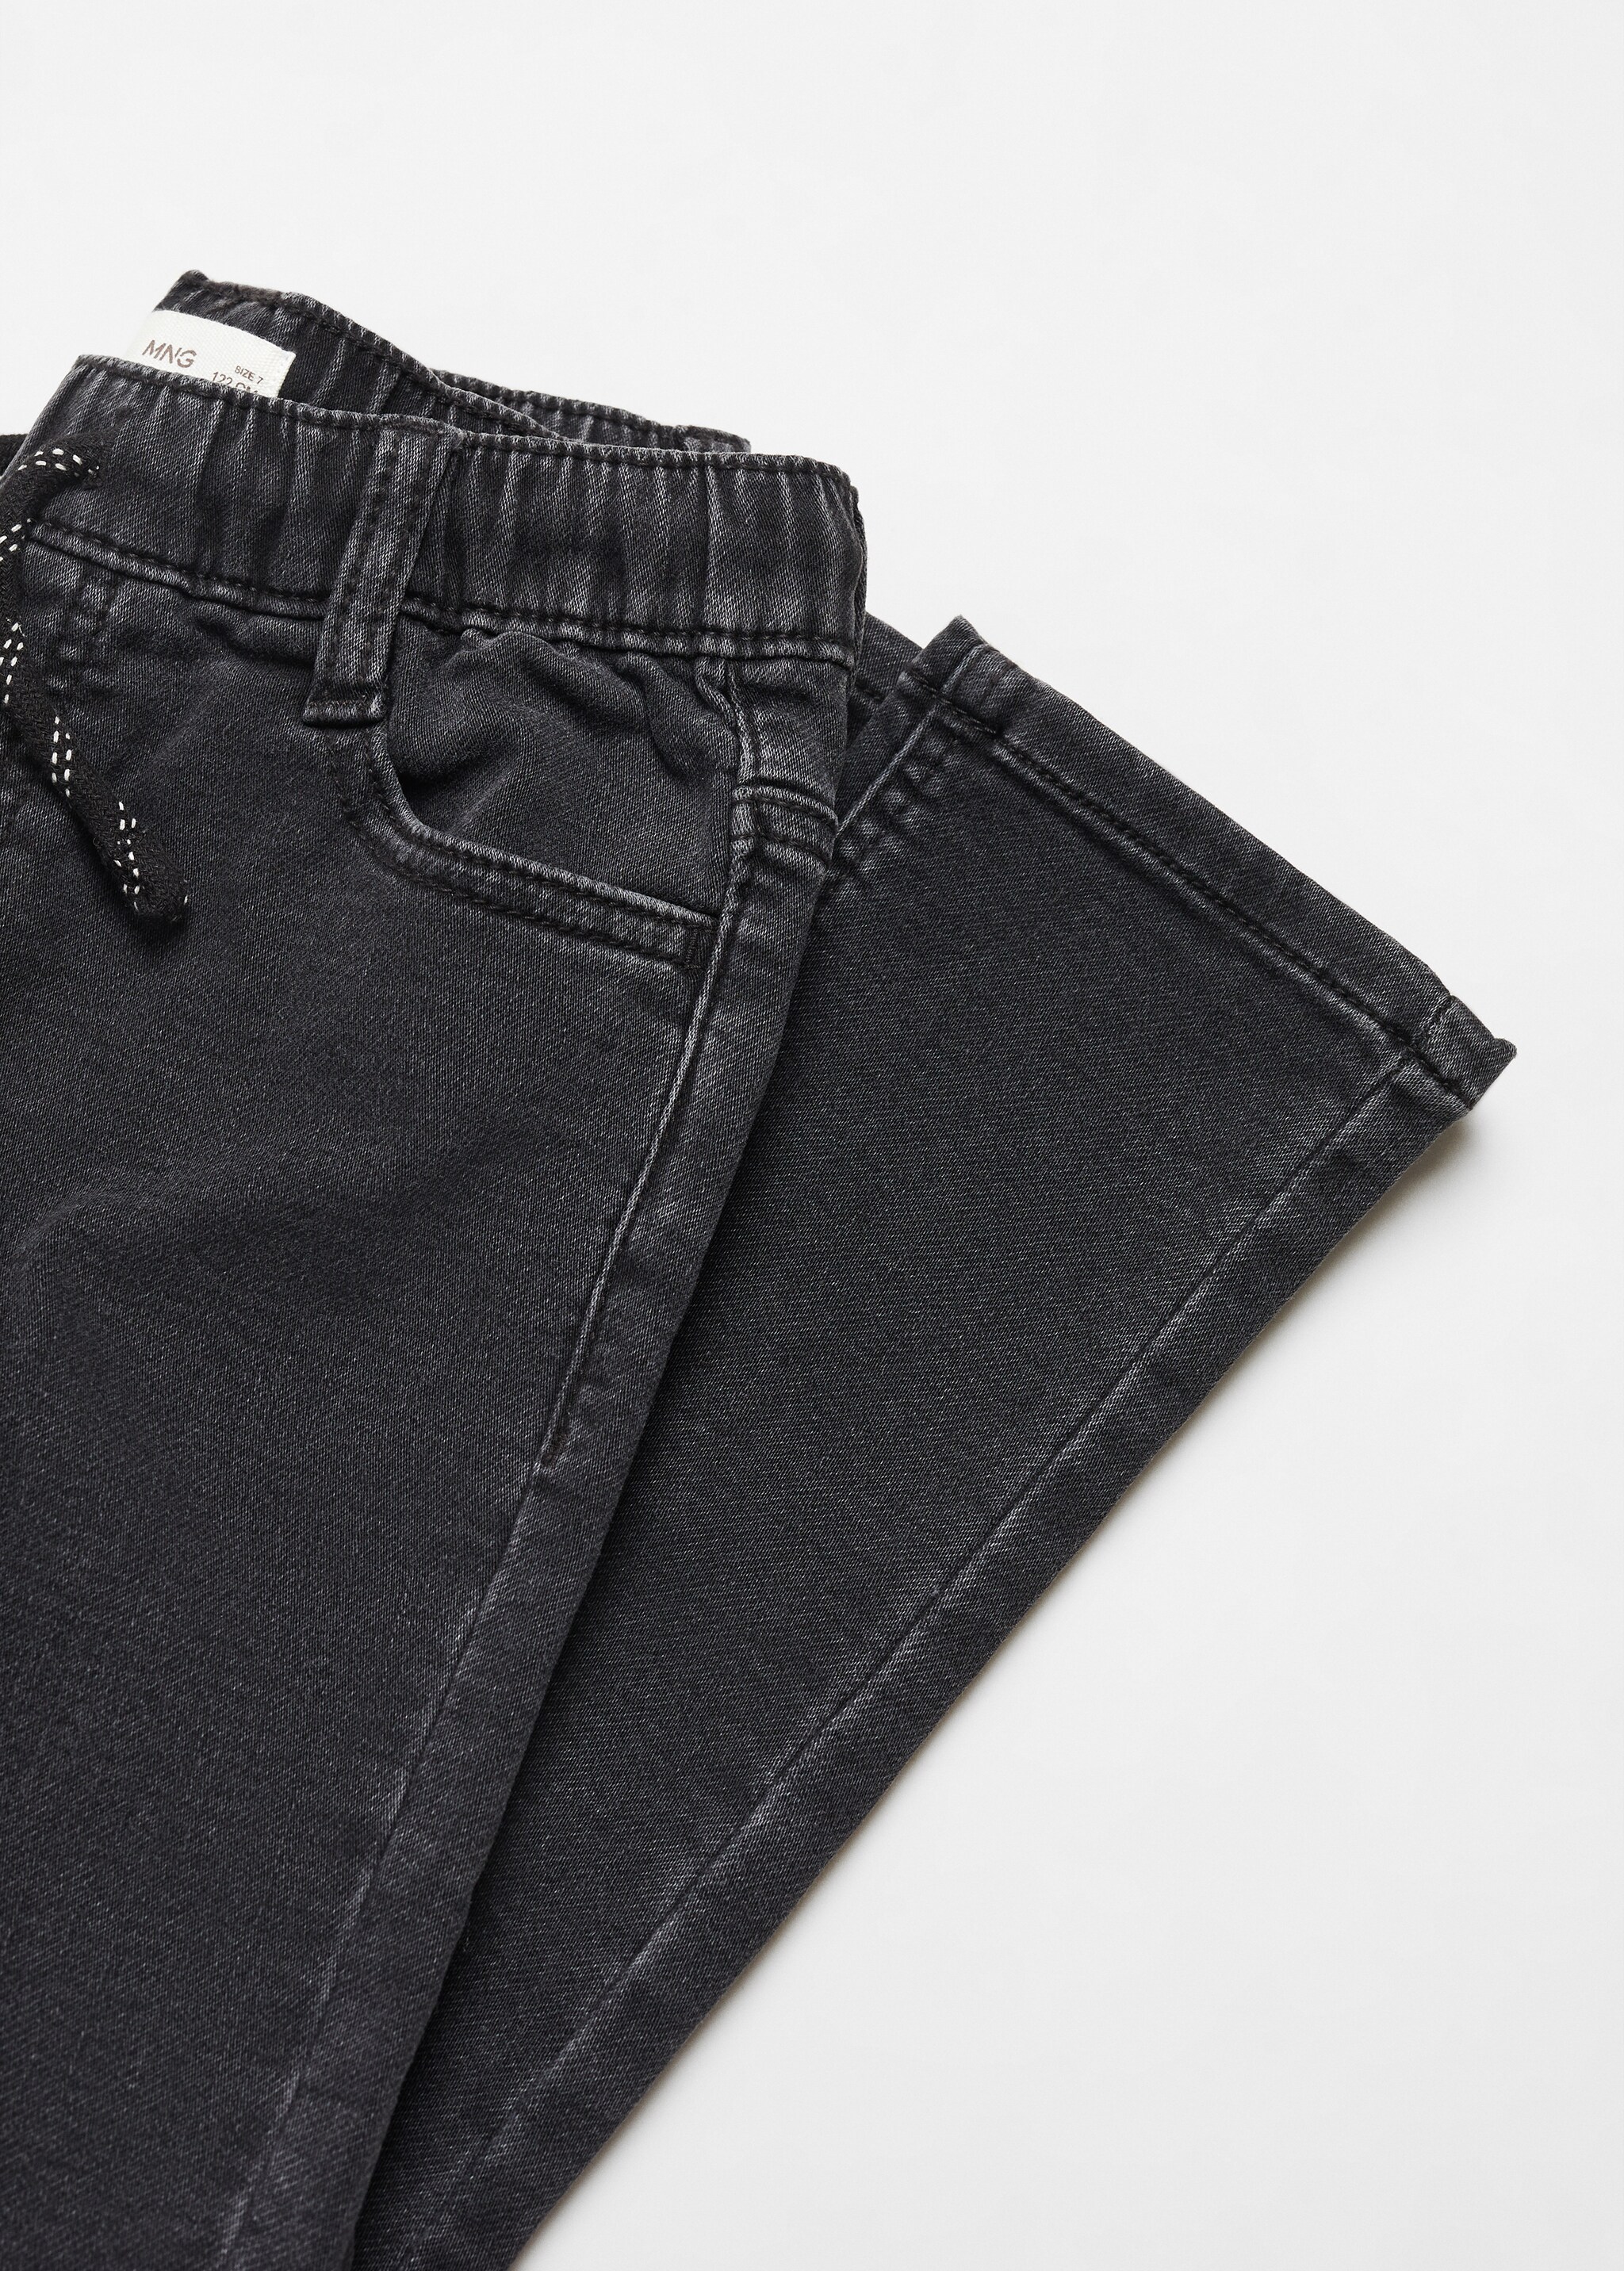 Drawstring waist jeans - Details of the article 8